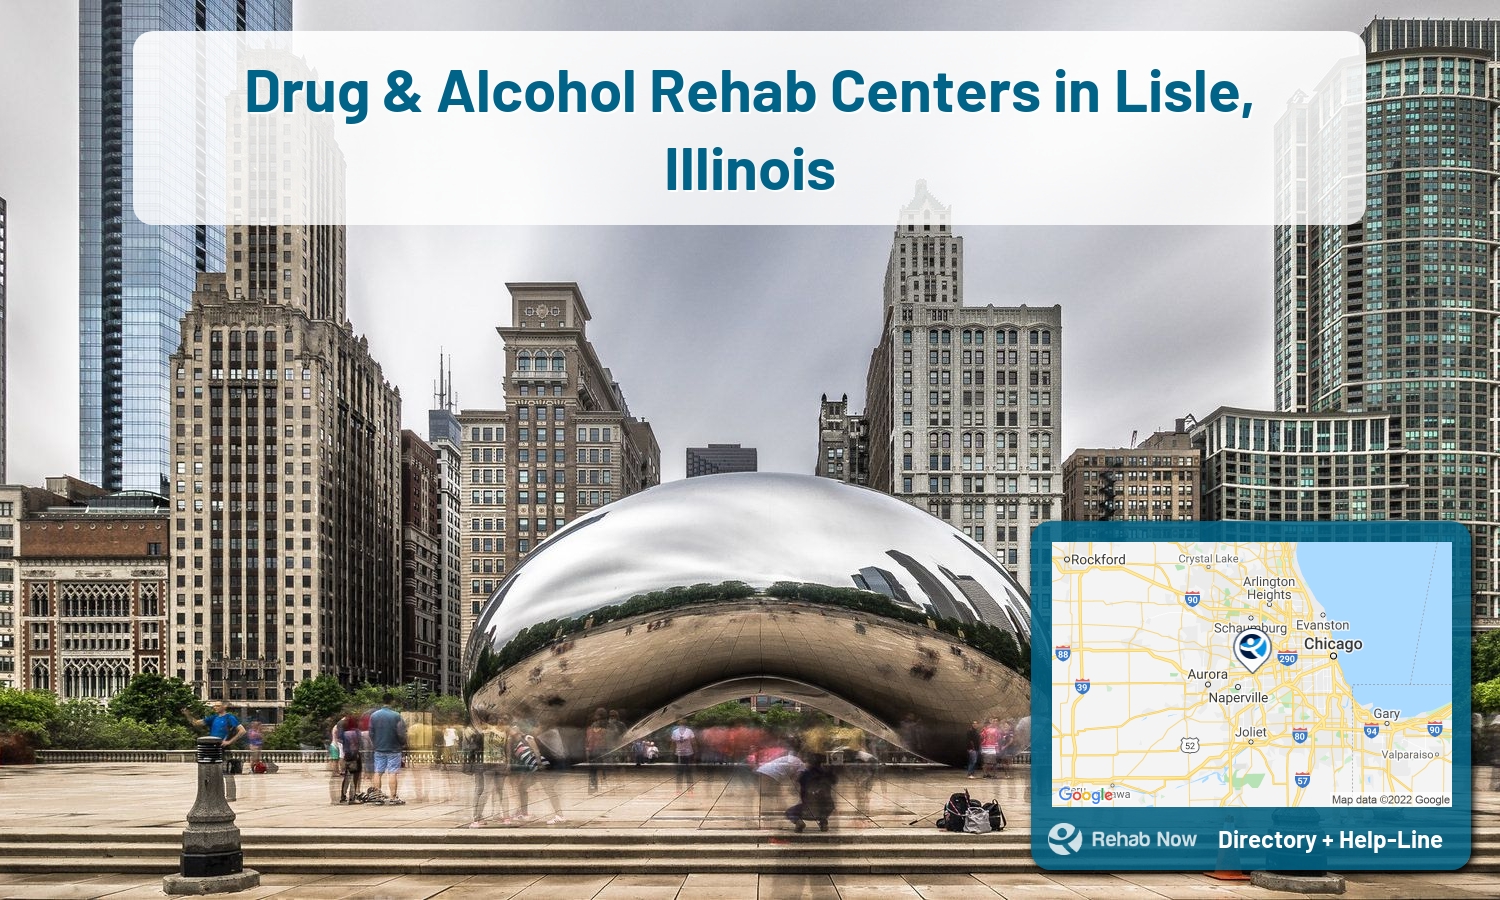 Lisle, IL Treatment Centers. Find drug rehab in Lisle, Illinois, or detox and treatment programs. Get the right help now!